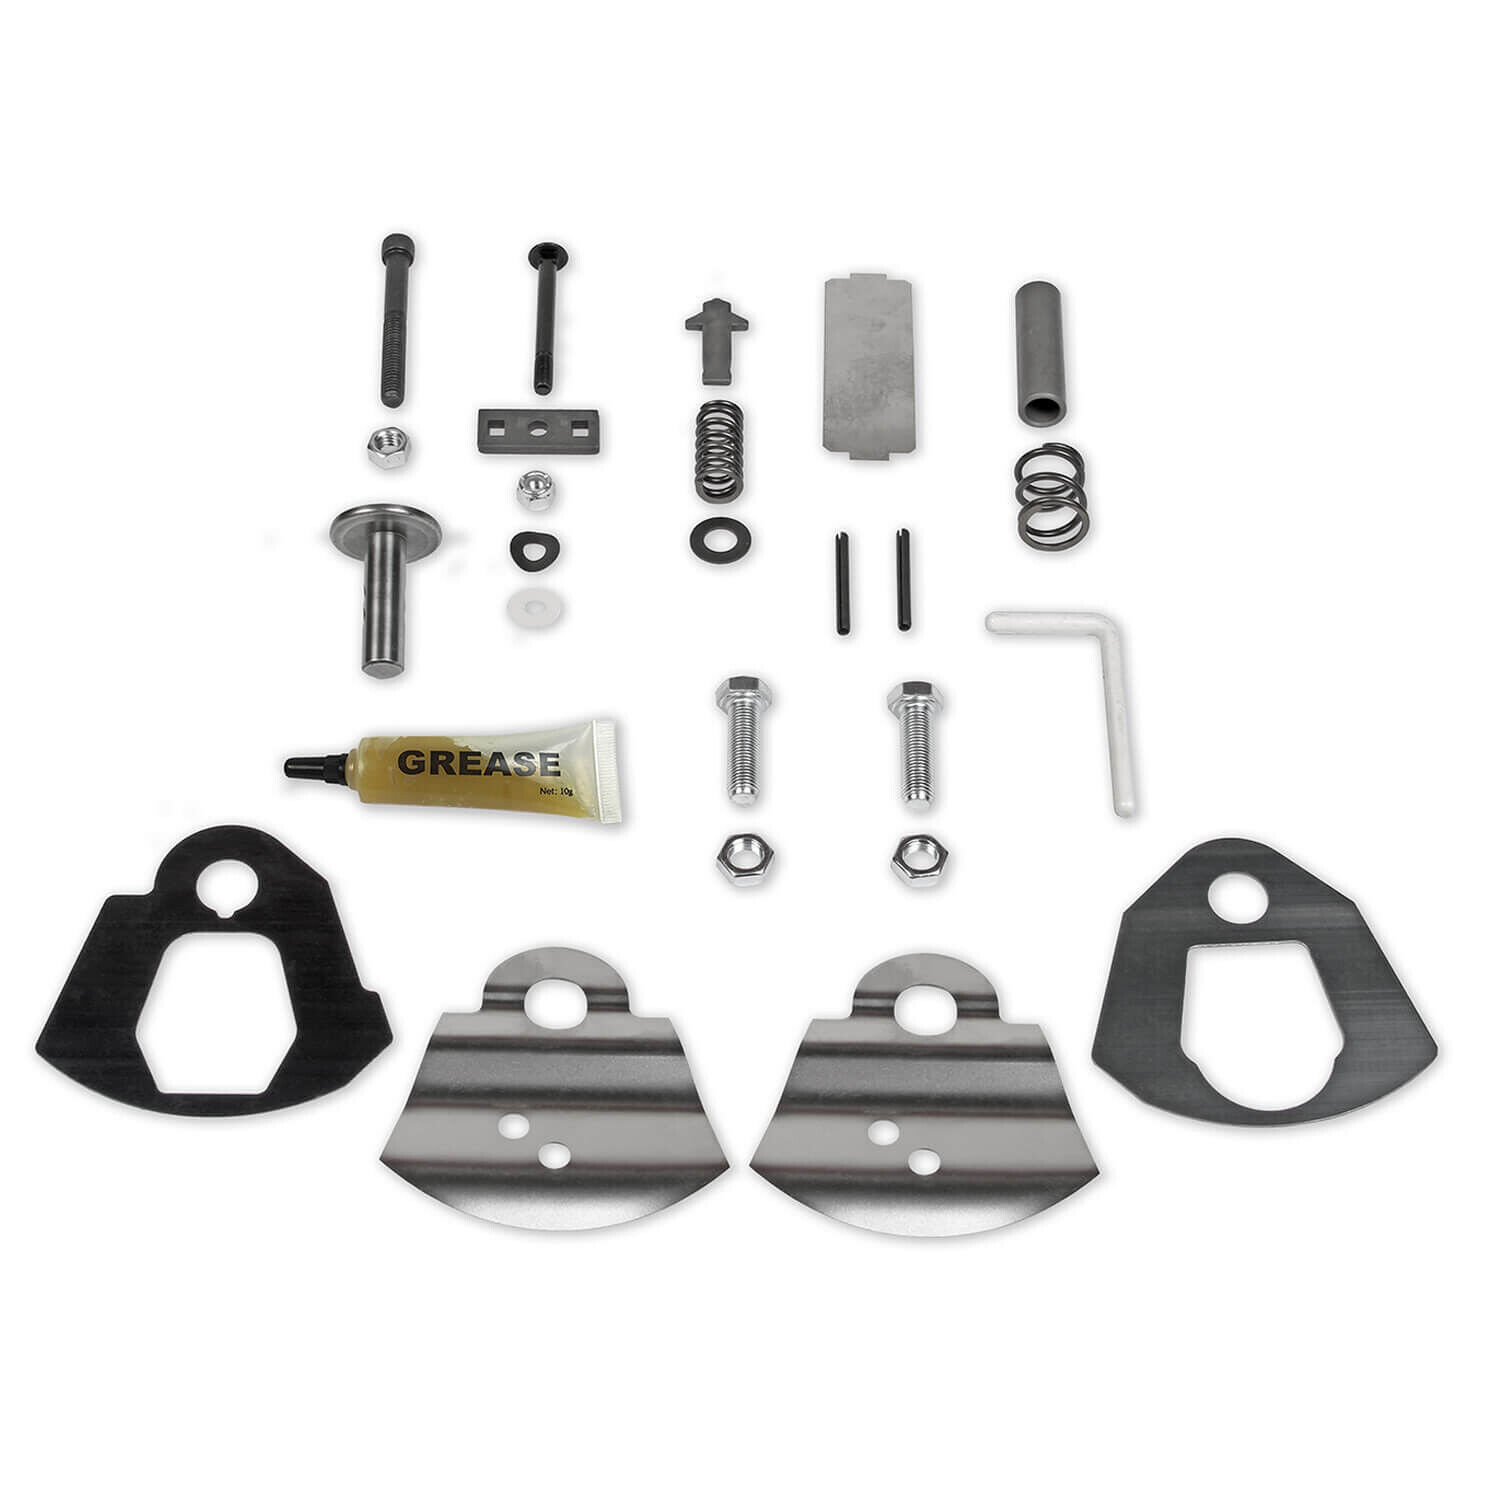 HURST 3327303 Master Rebuild Kit for COMP/PLUS COMPETITION PLUS 4 Speed Shifters